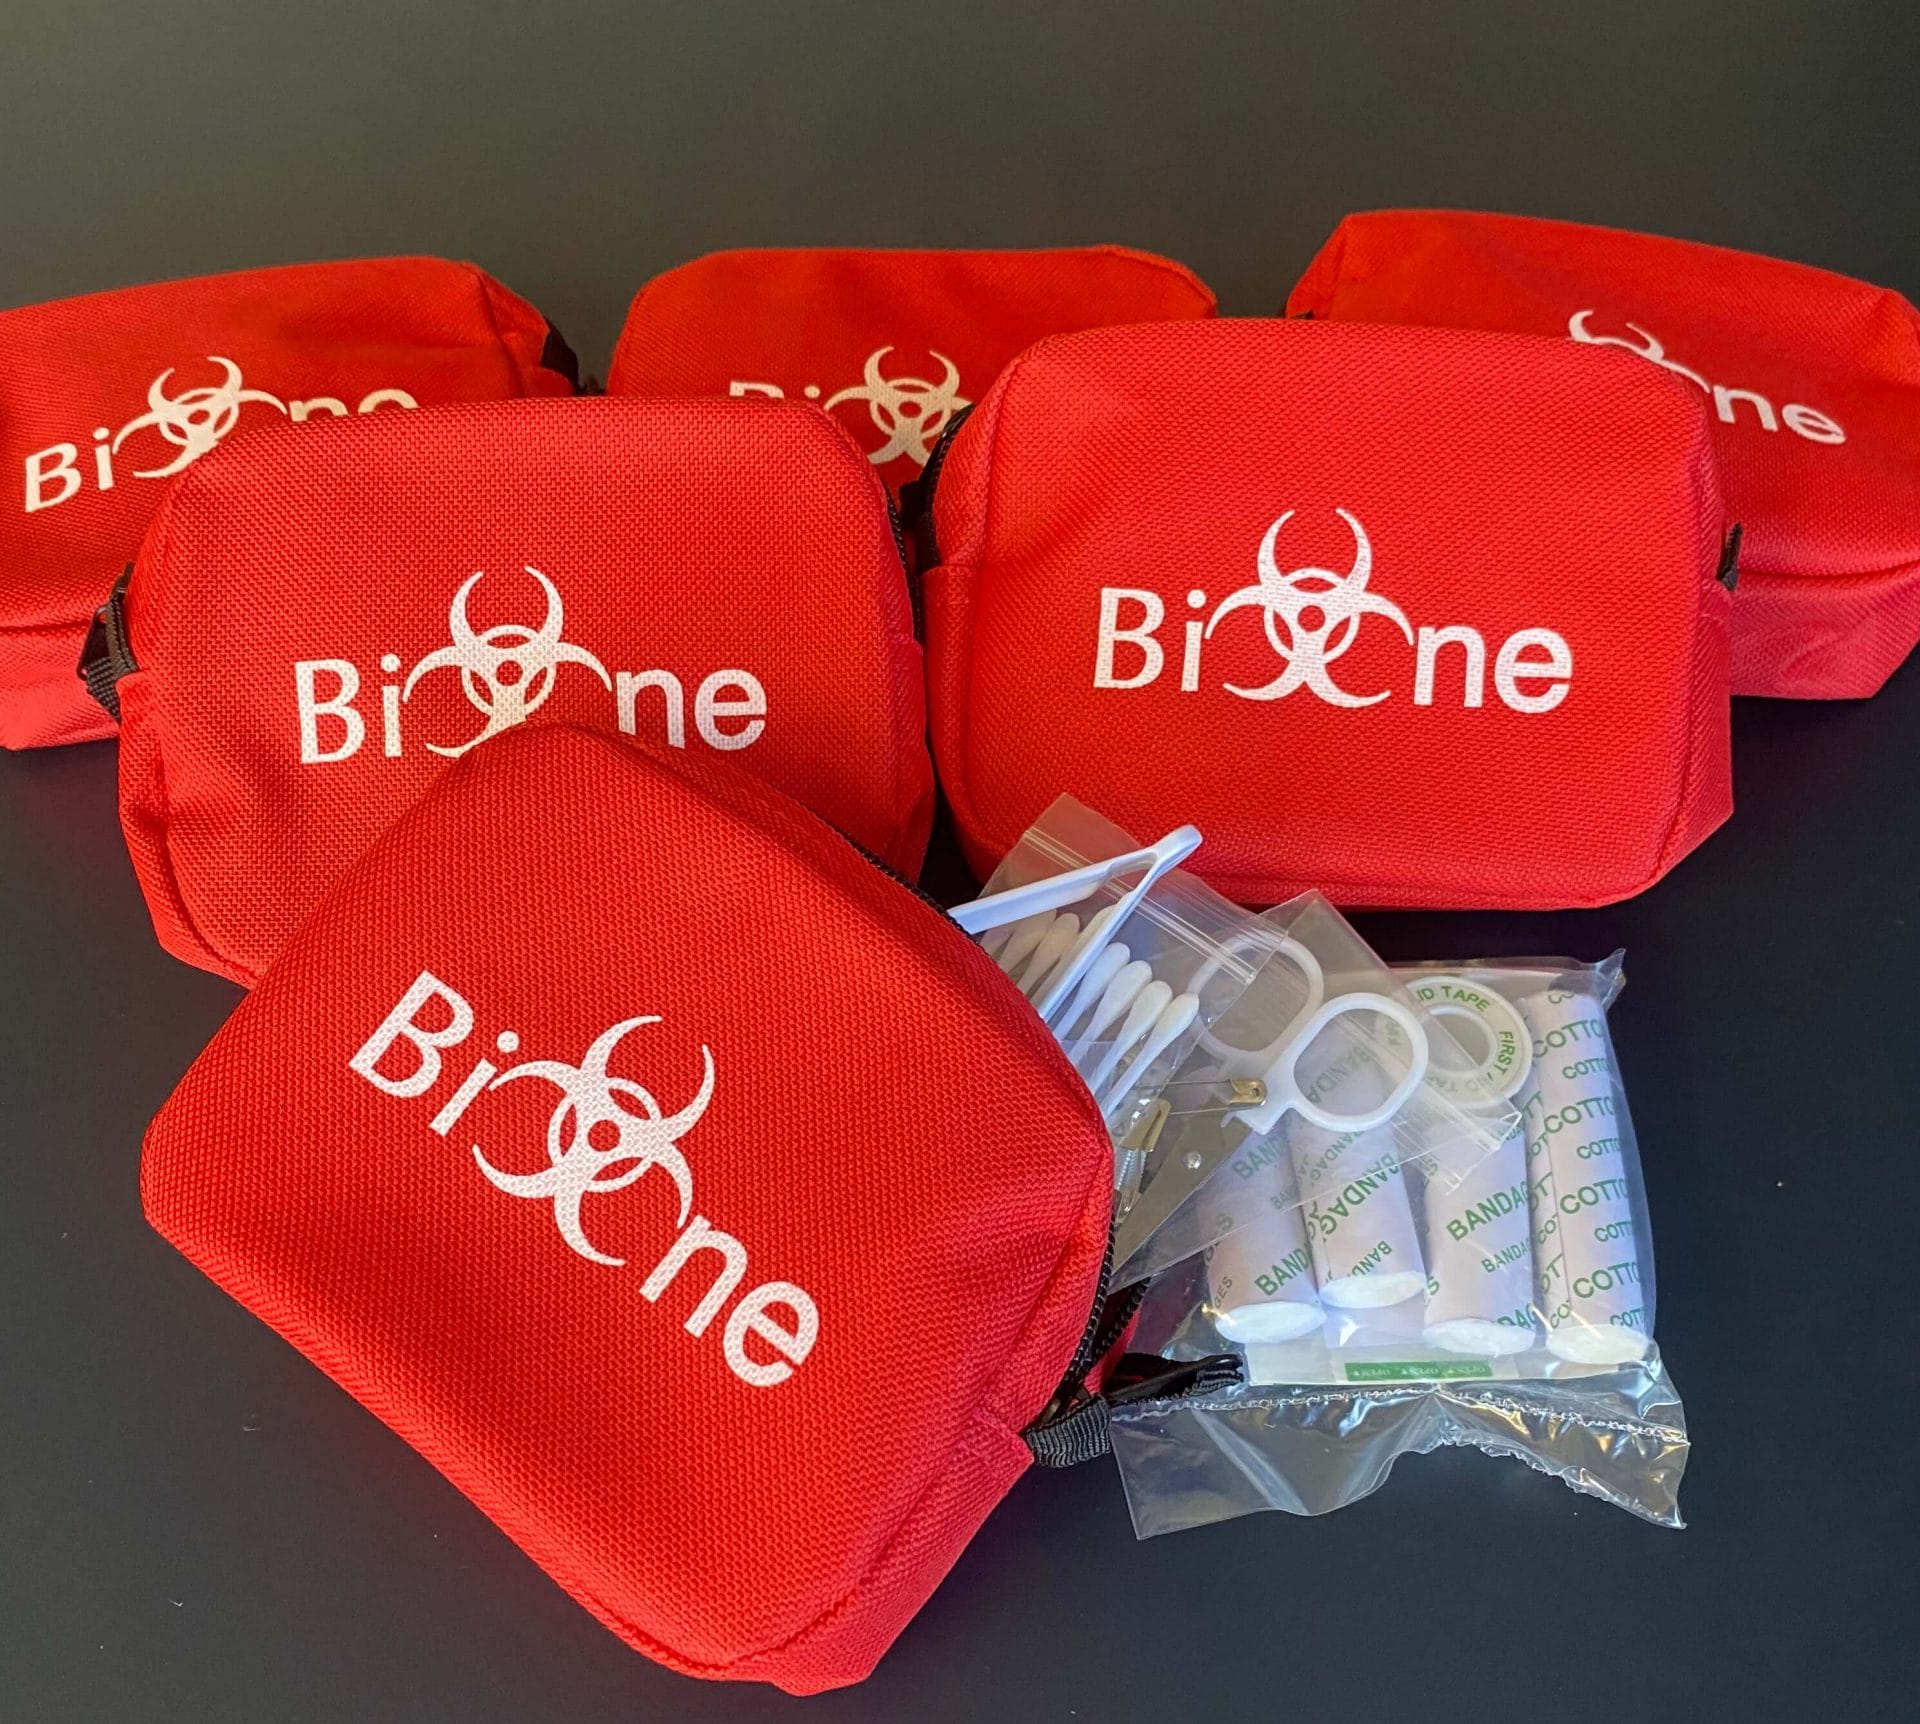 #HelpFirst for First Responders Bio-One First Aid Kits